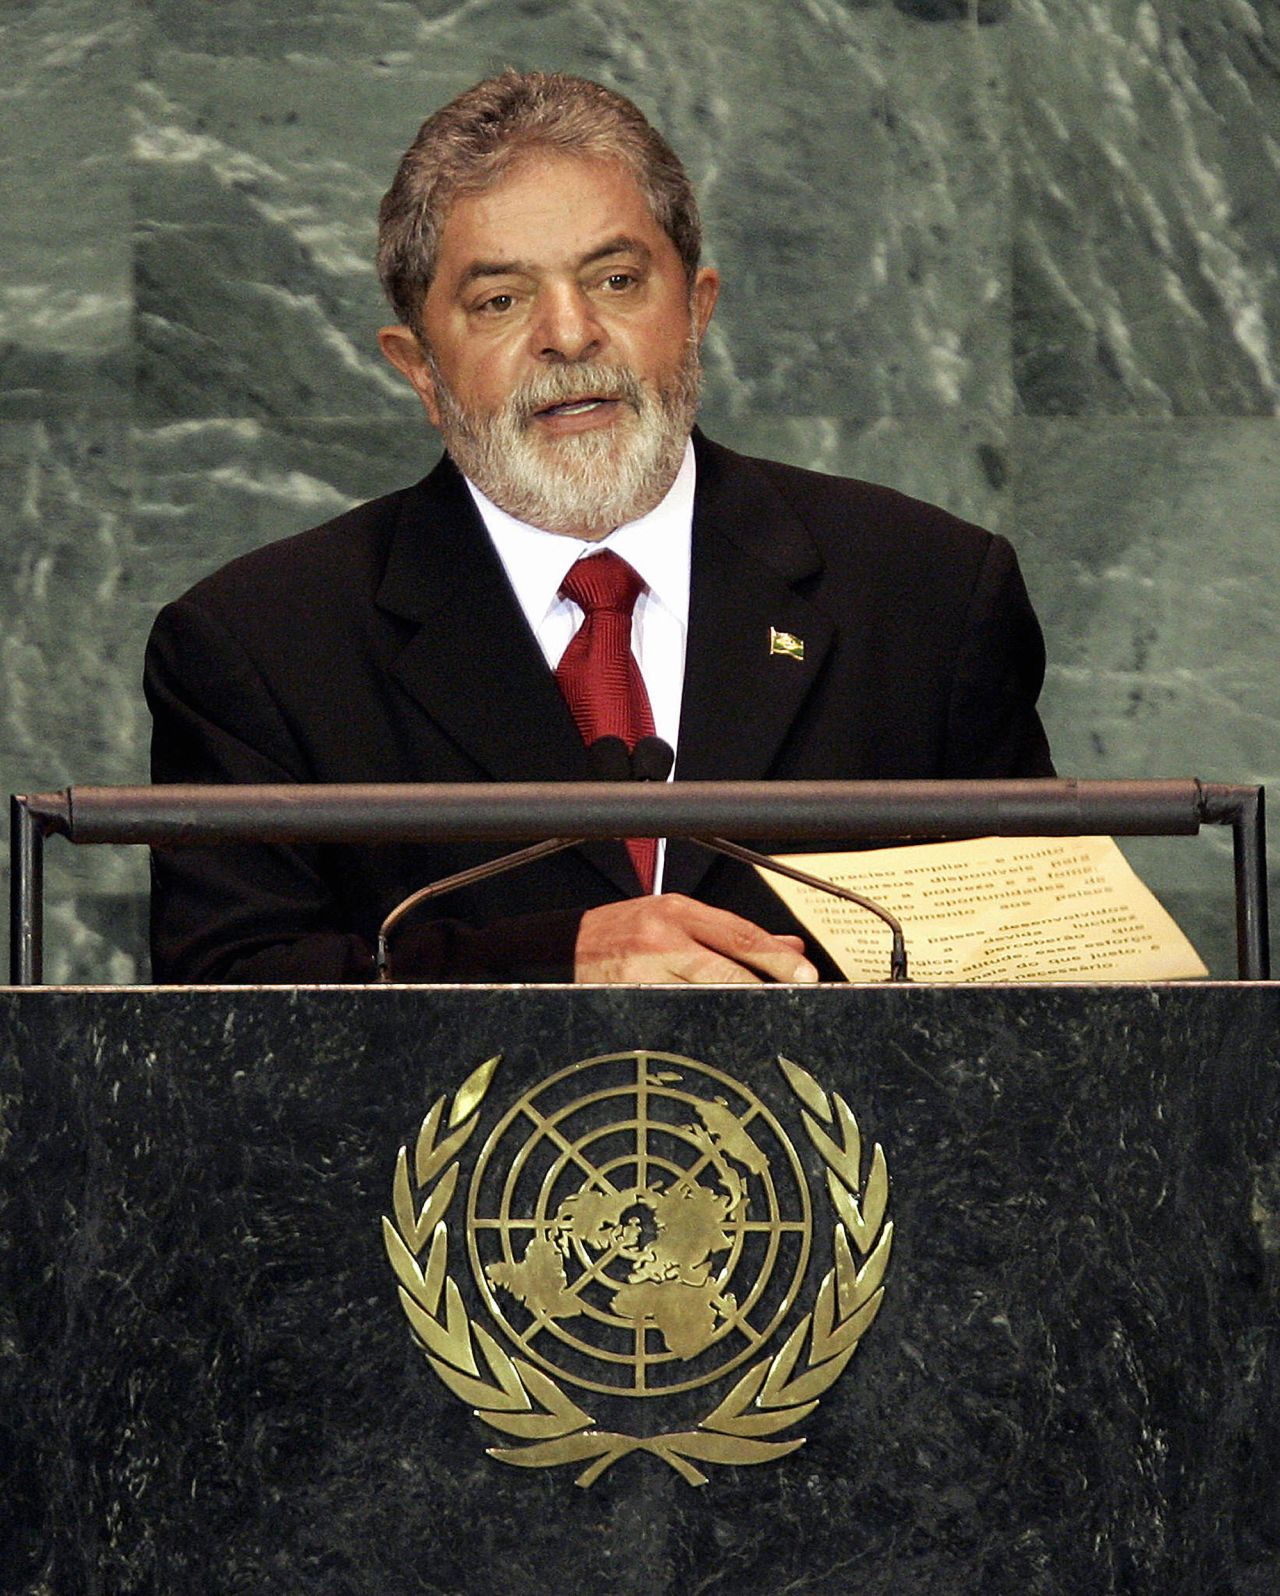 Lula speaks during the 2005 World Summit at the 60th session of the United Nations General Assembly.